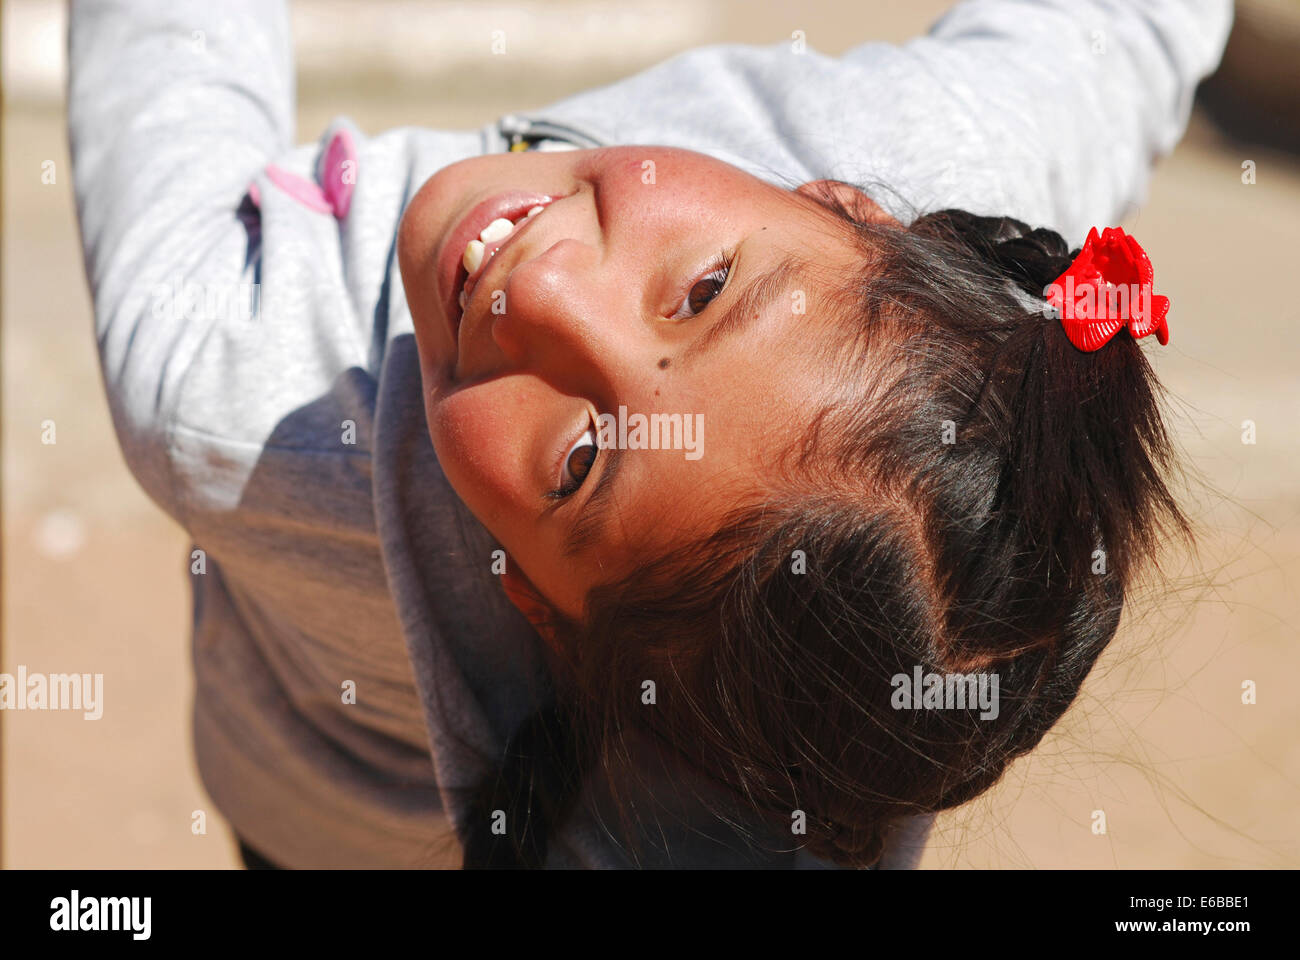 Bolivia, El alto, portrait of a cute smiling girl with plaited hair upside down. Stock Photo